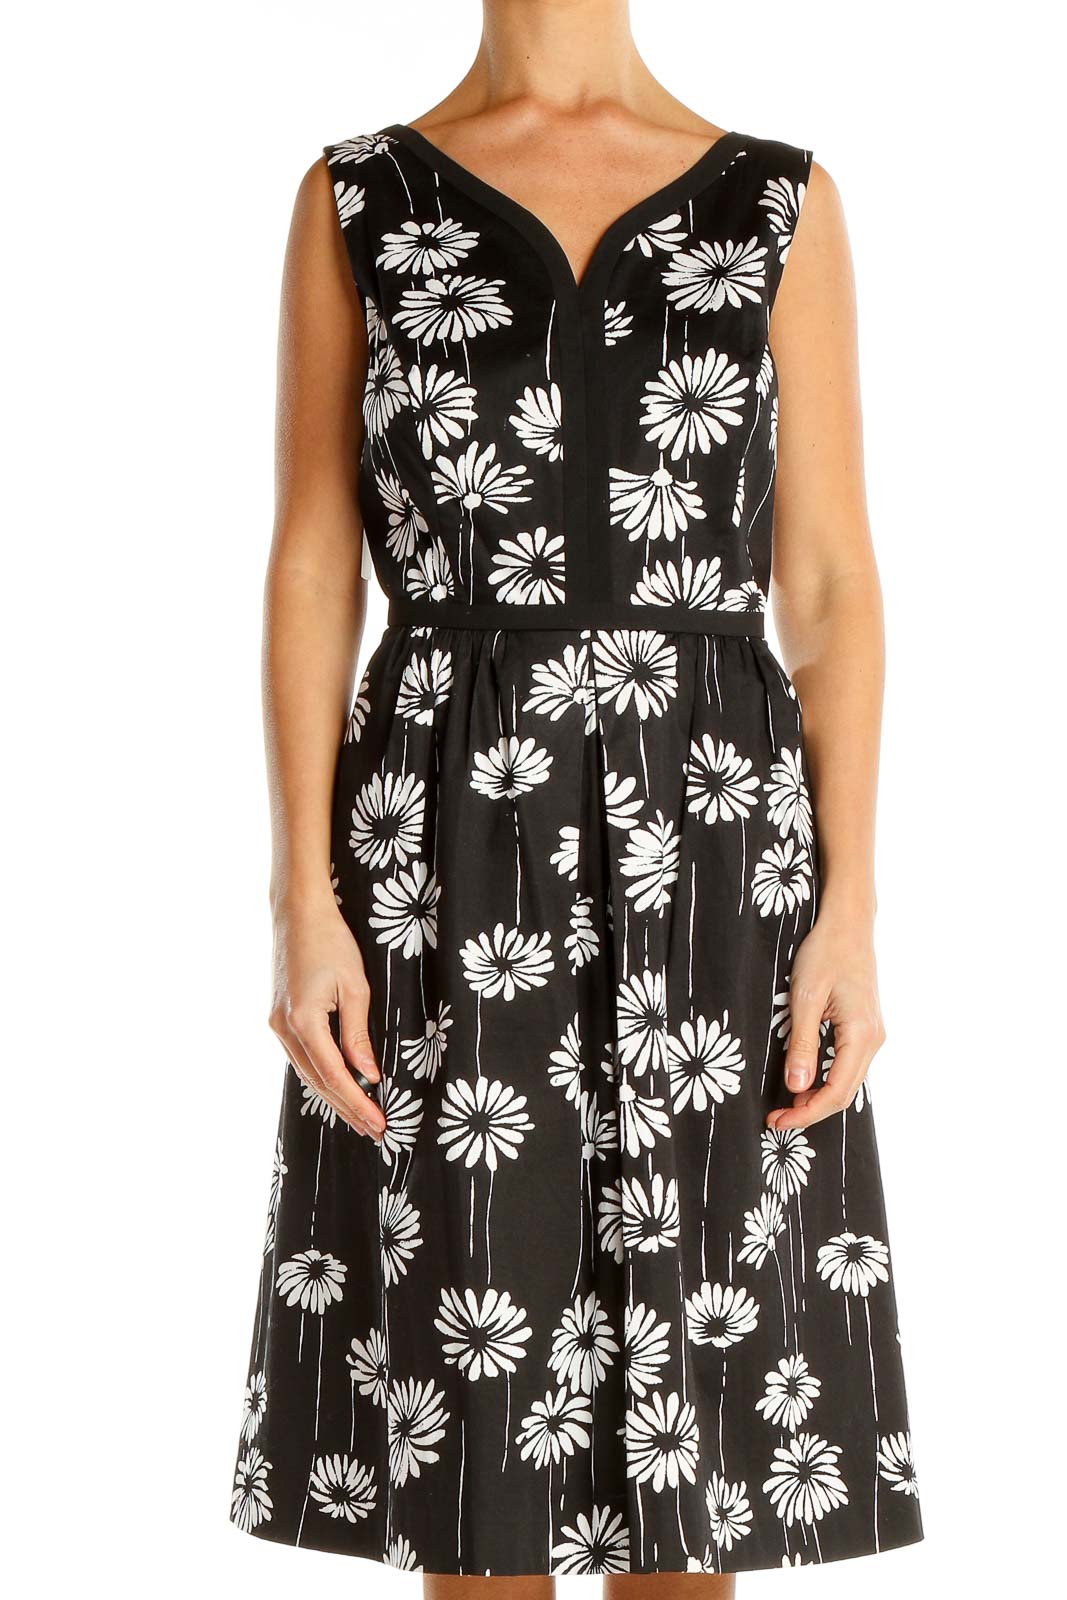 Black White Floral Print Chic Fit & Flare Dress Front